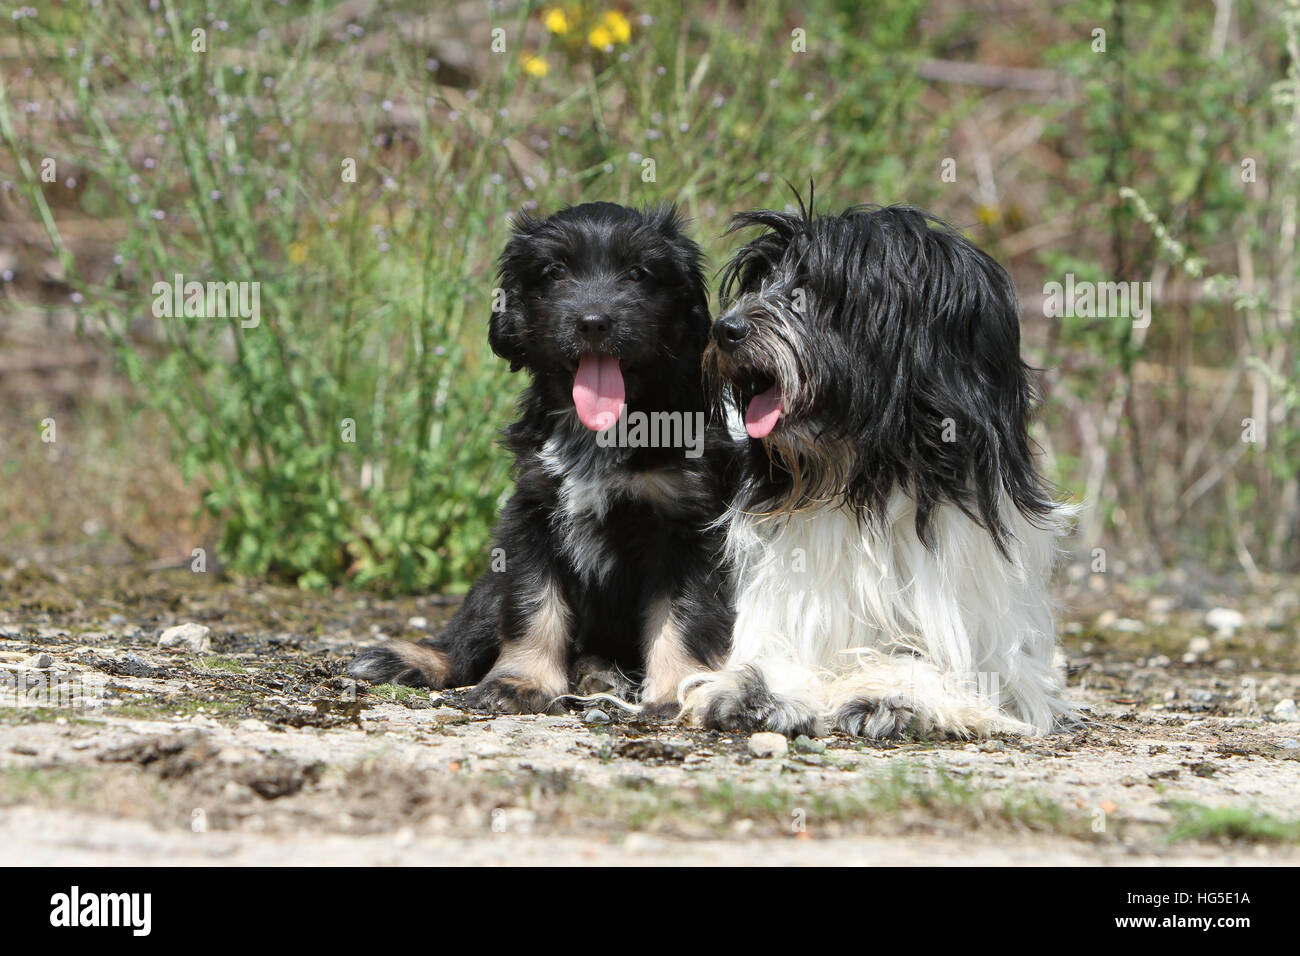 Dog Schapendoes / Dutch Sheepdog adult and puppy sitting natural Stock Photo